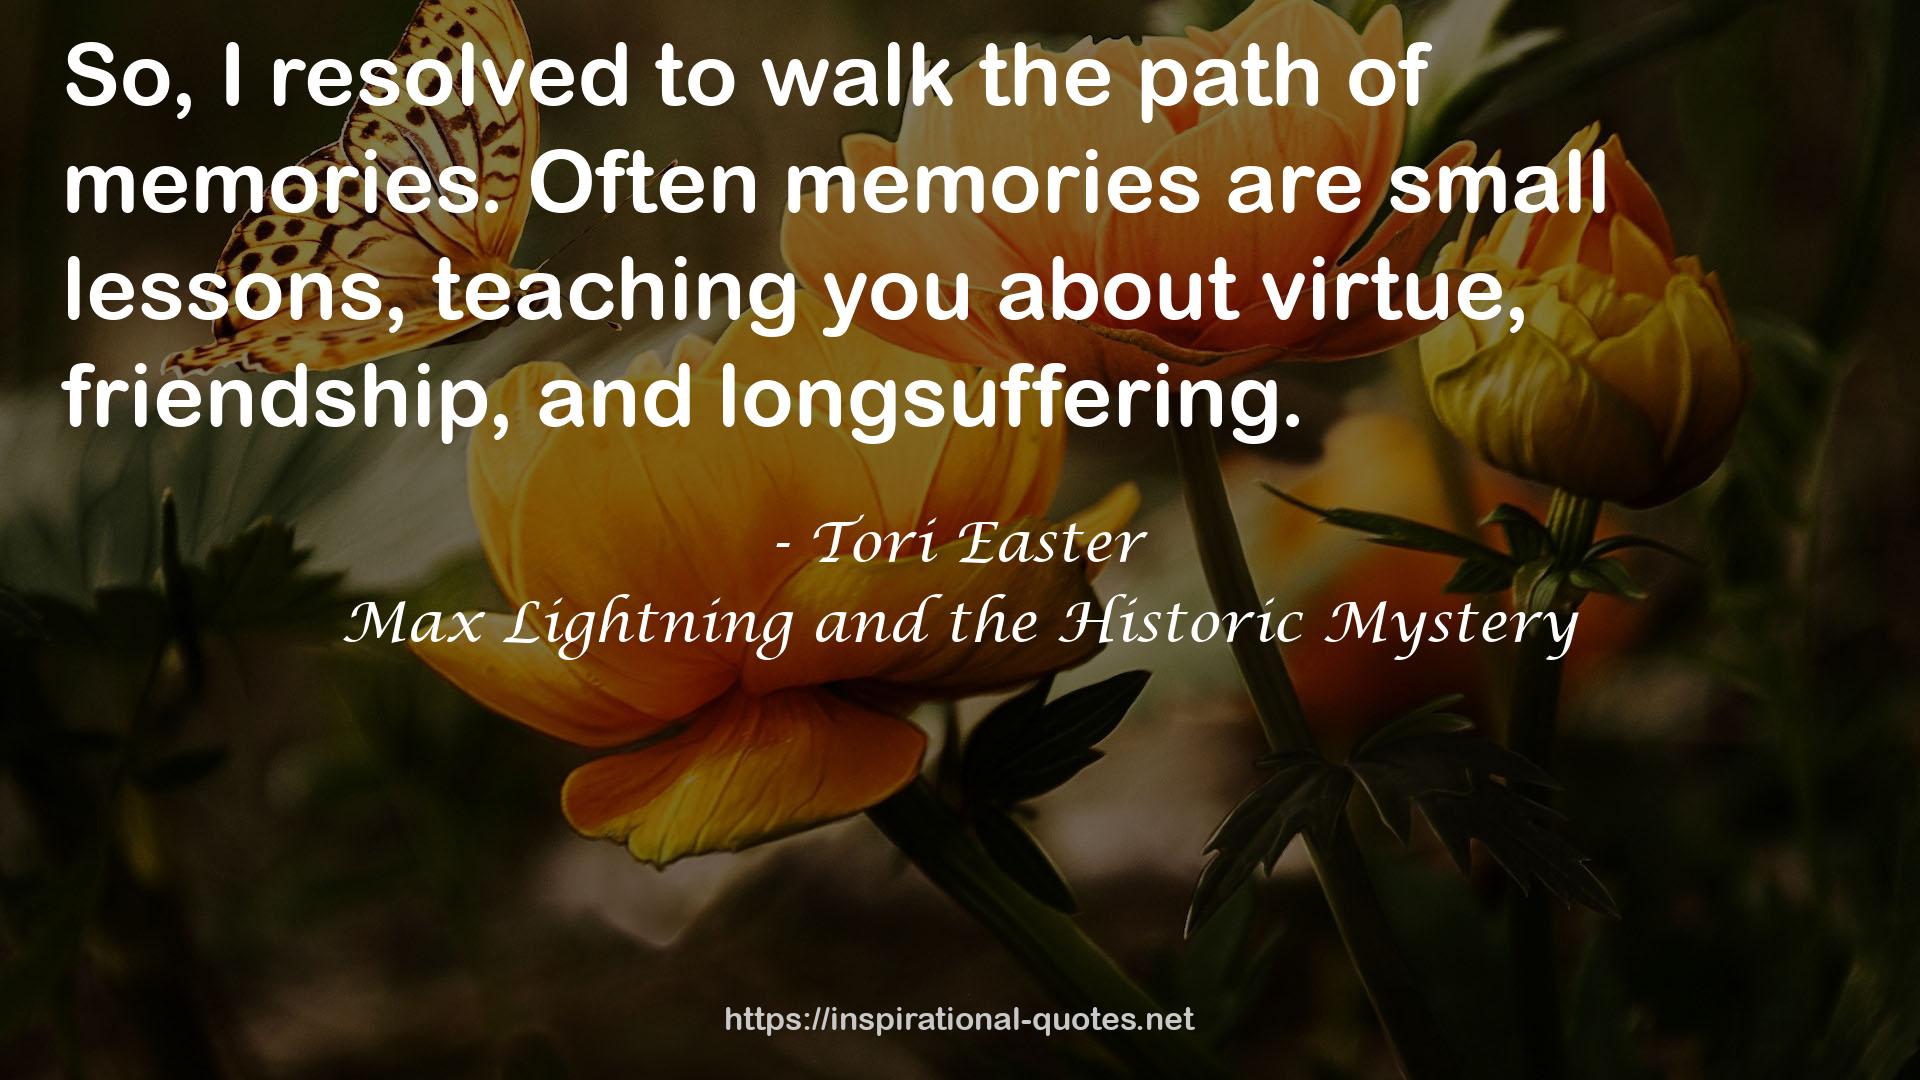 Tori Easter QUOTES